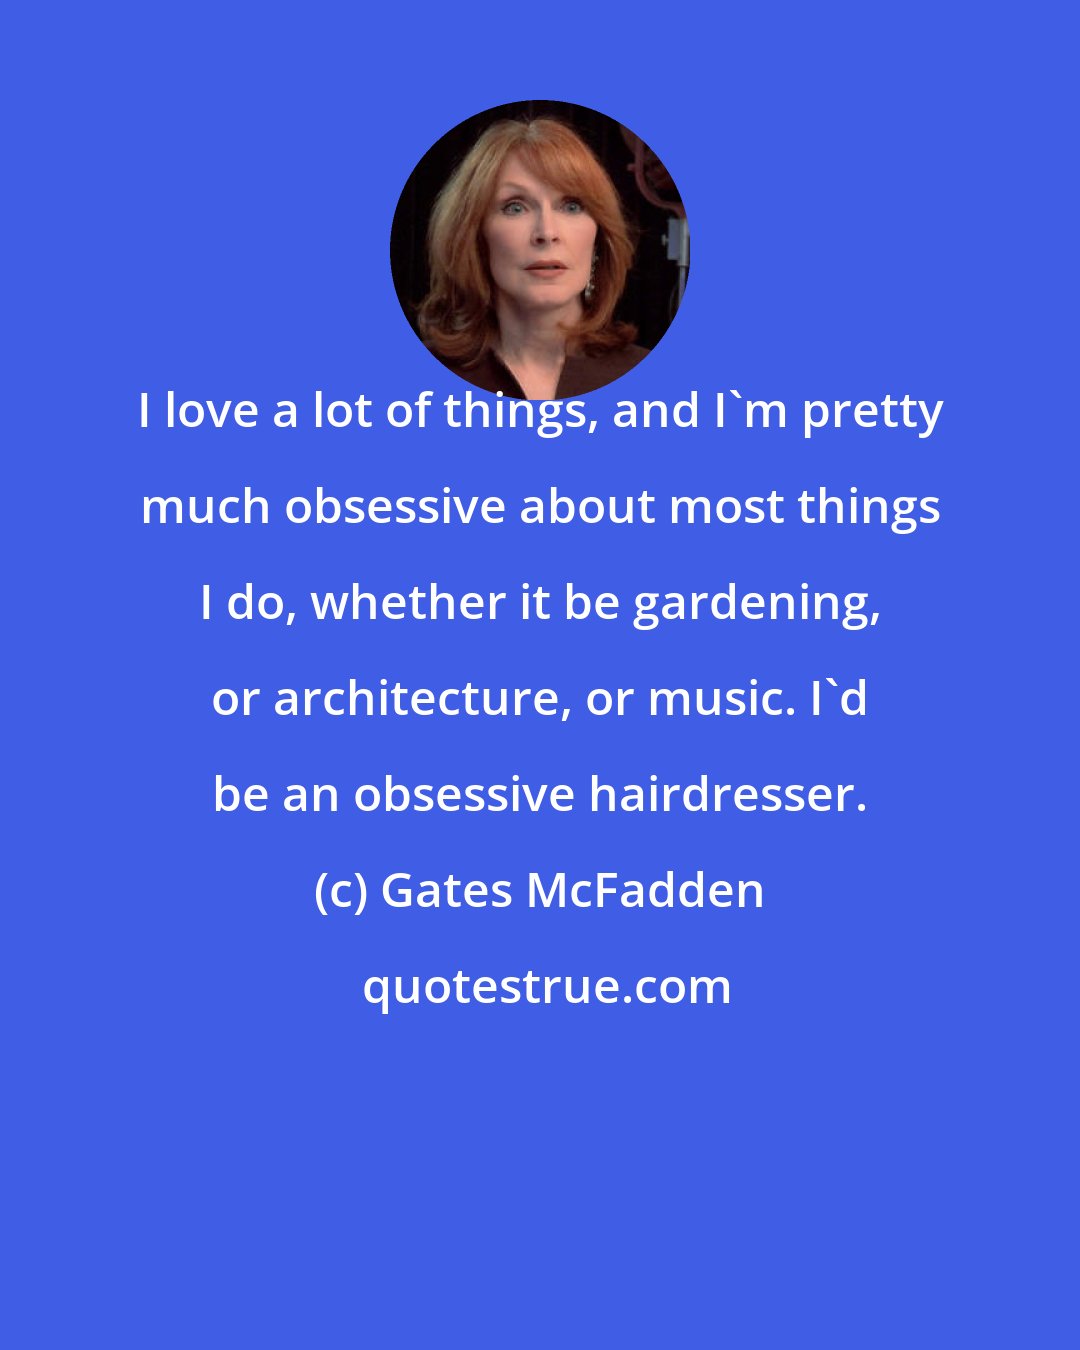 Gates McFadden: I love a lot of things, and I'm pretty much obsessive about most things I do, whether it be gardening, or architecture, or music. I'd be an obsessive hairdresser.